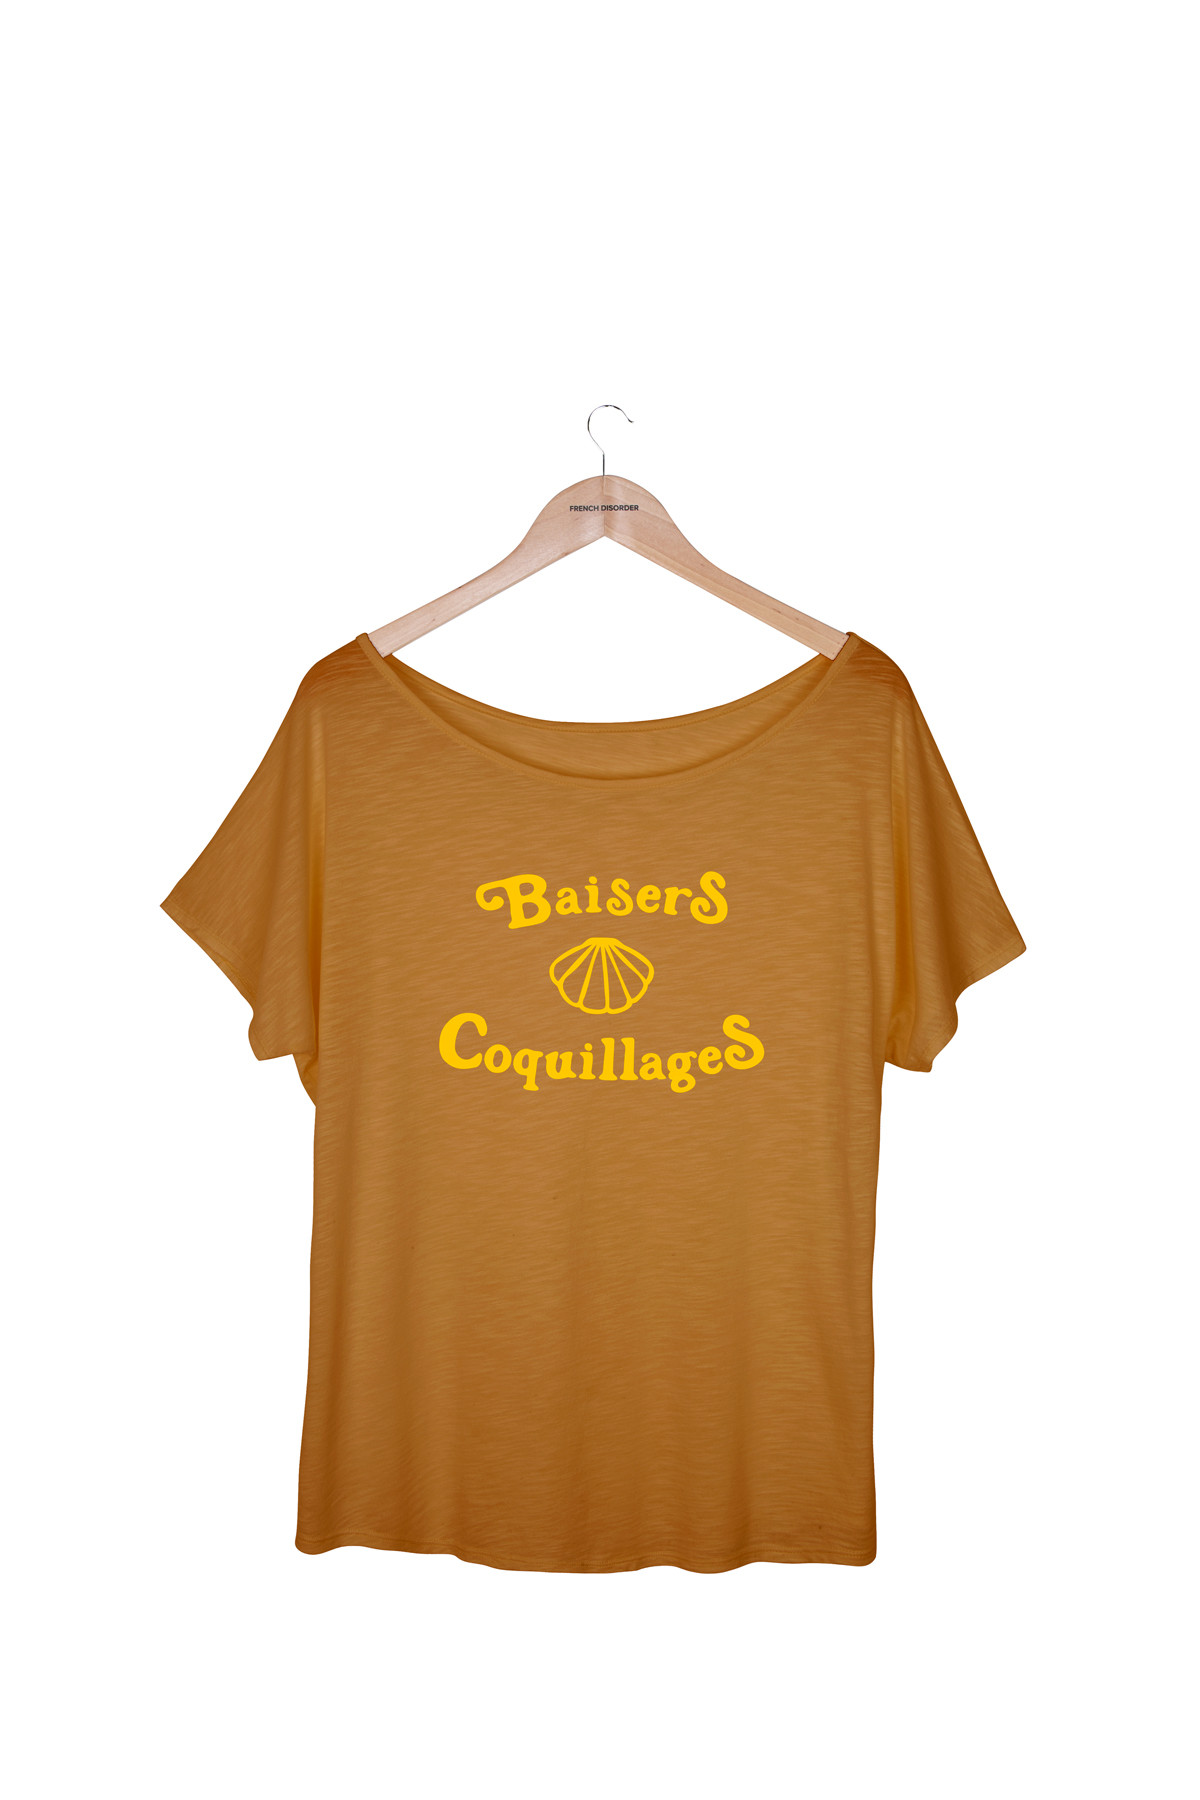 Tshirt Cleo BAISERS & COQUILLAGES